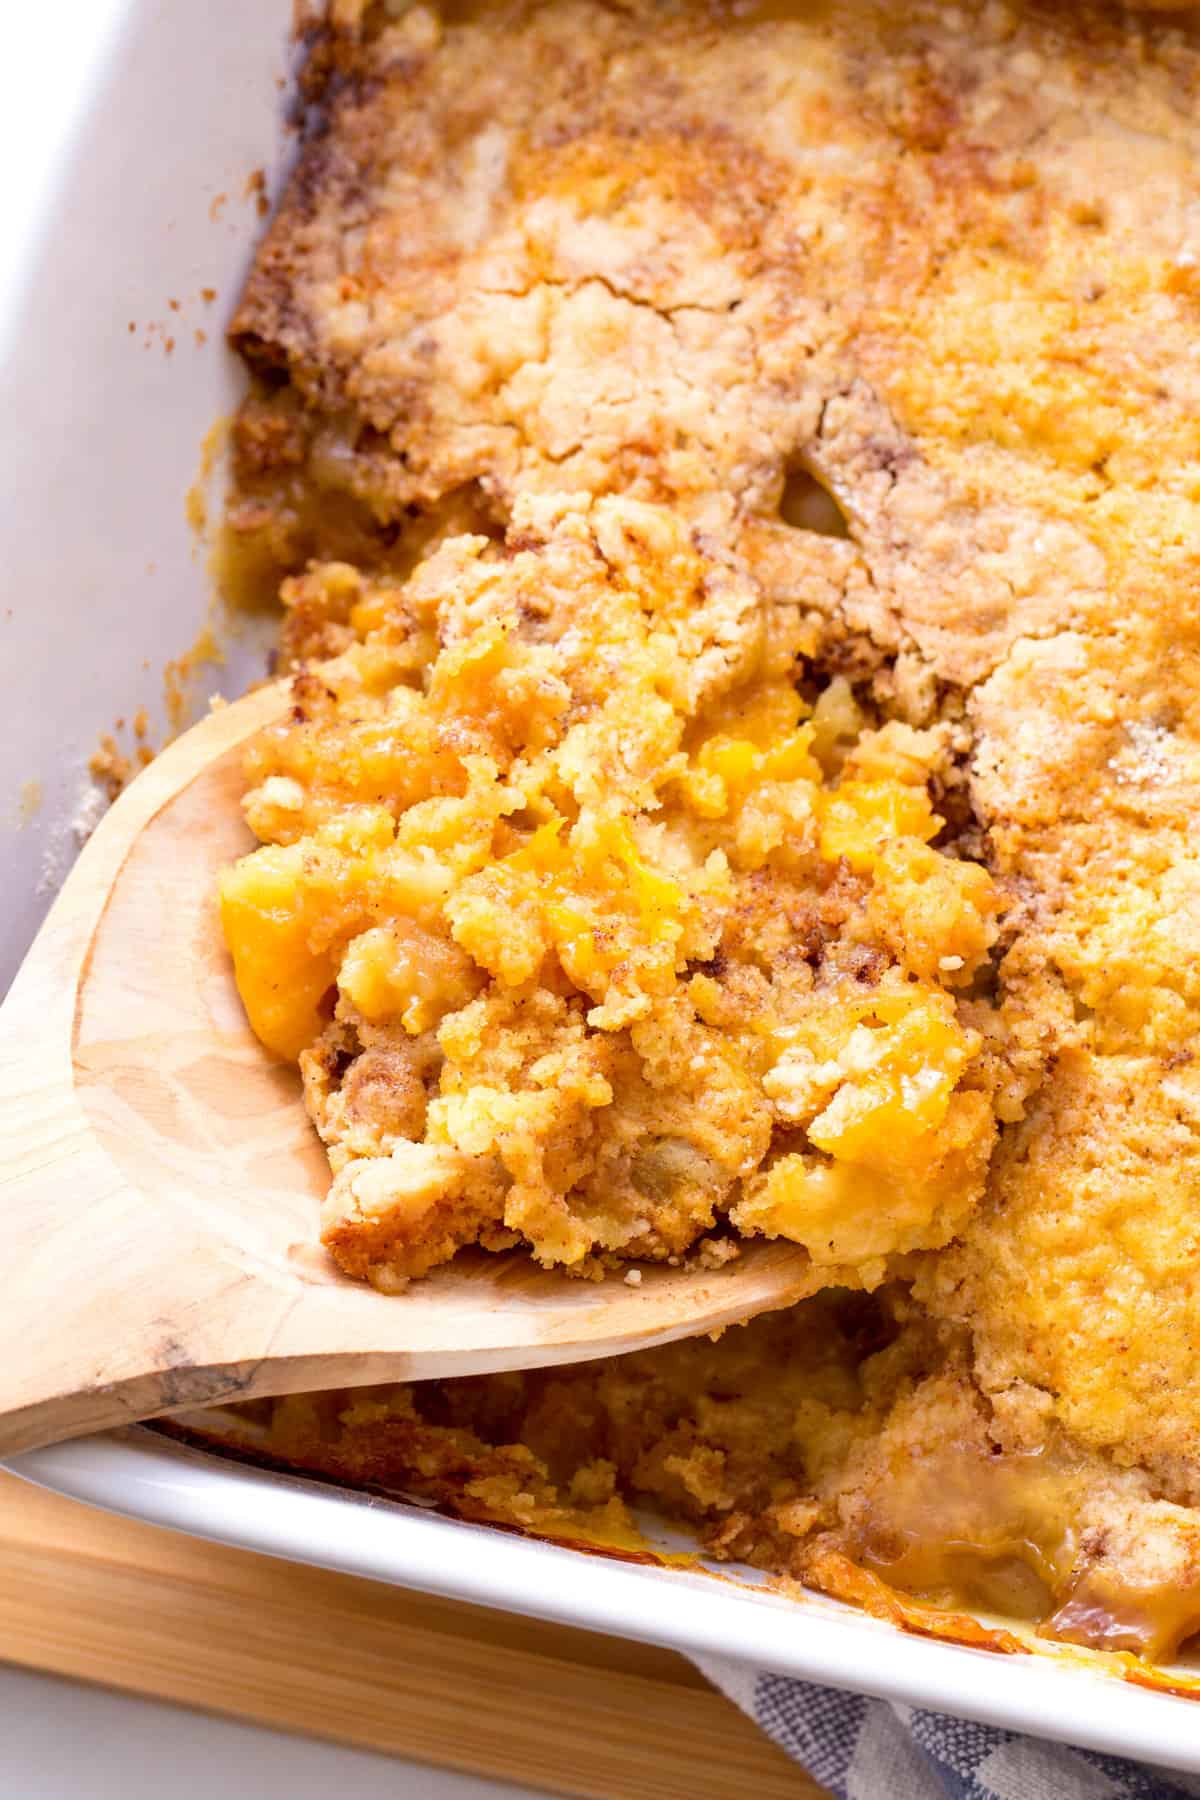 close up image of a wooden spoonful digging into a casserole dish of peach cobbler